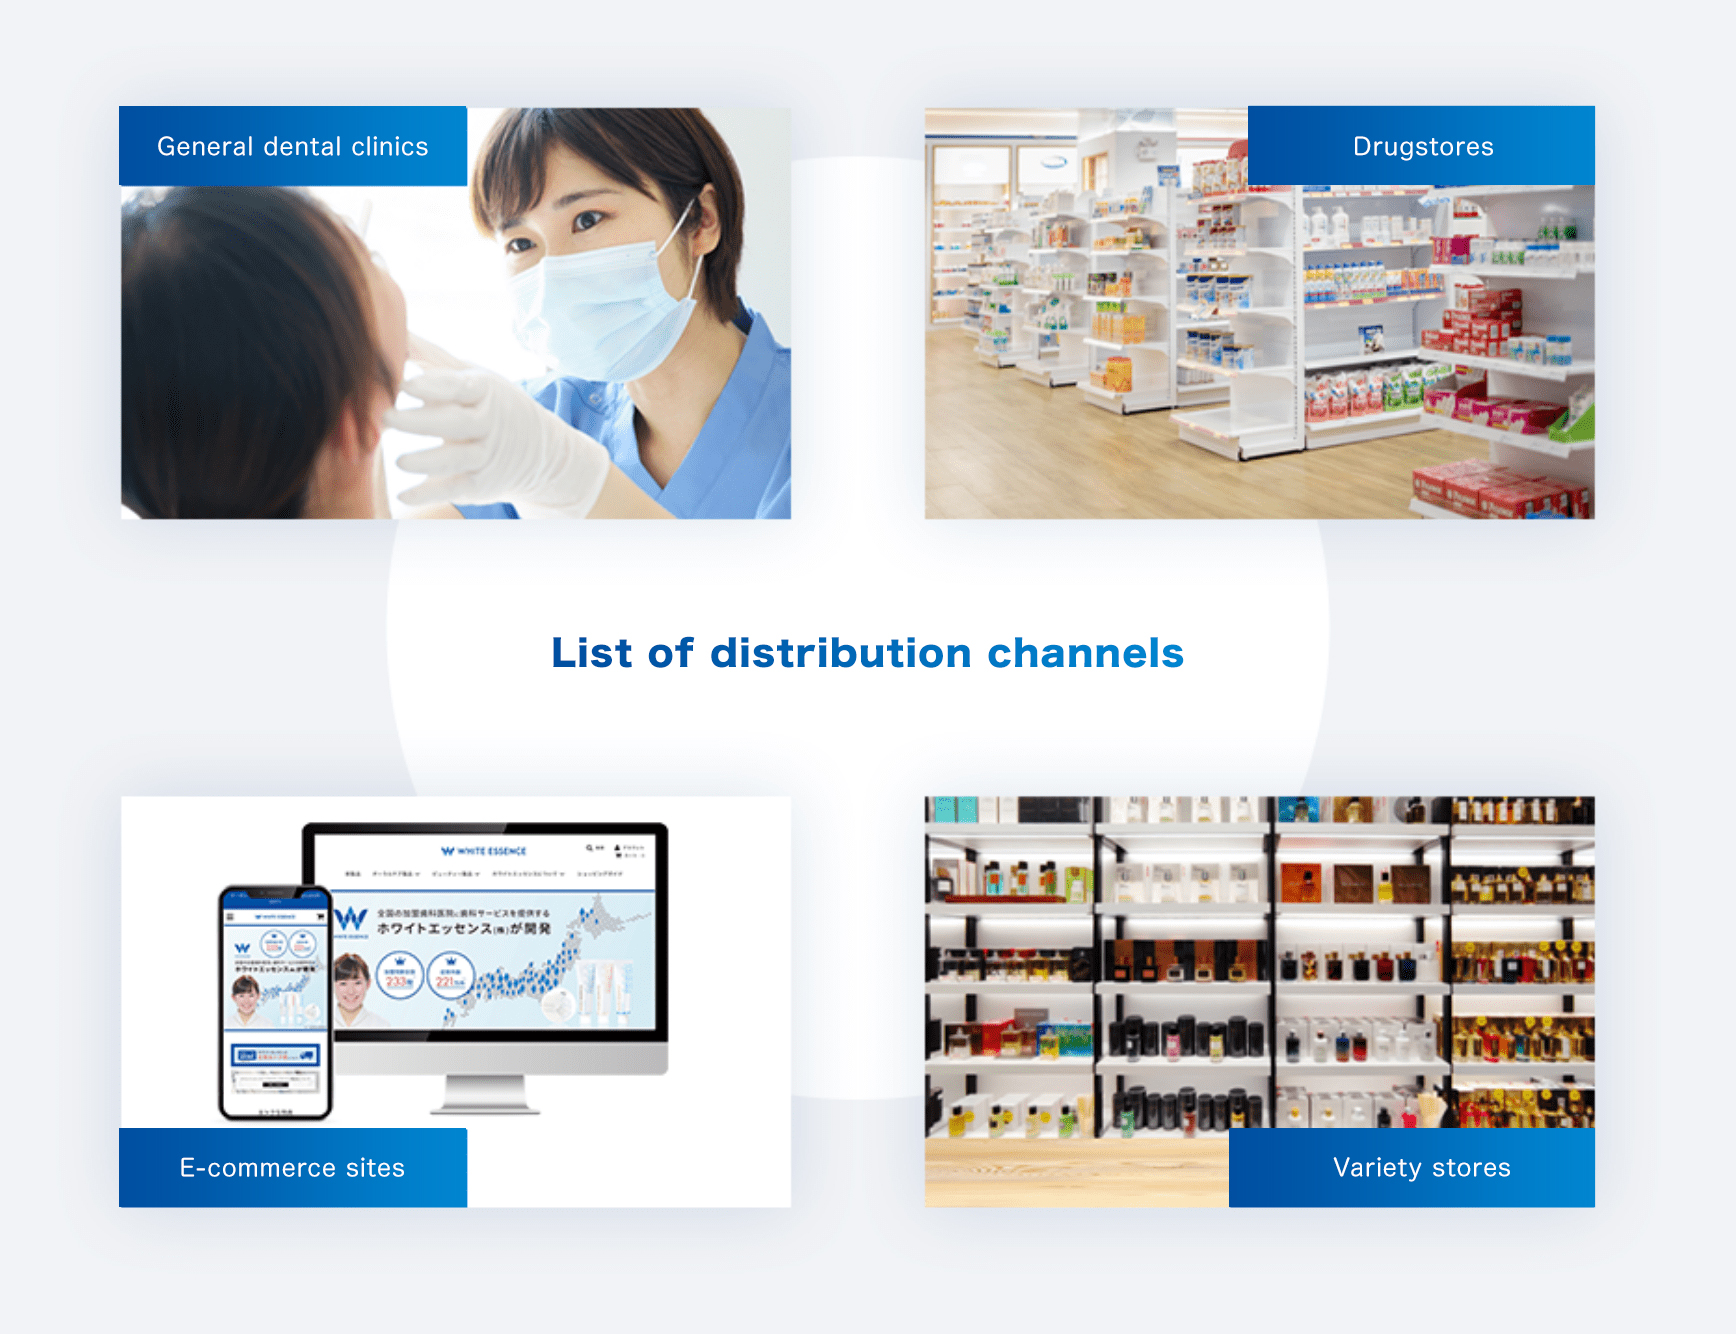 Direct sales to customers through different distribution channels